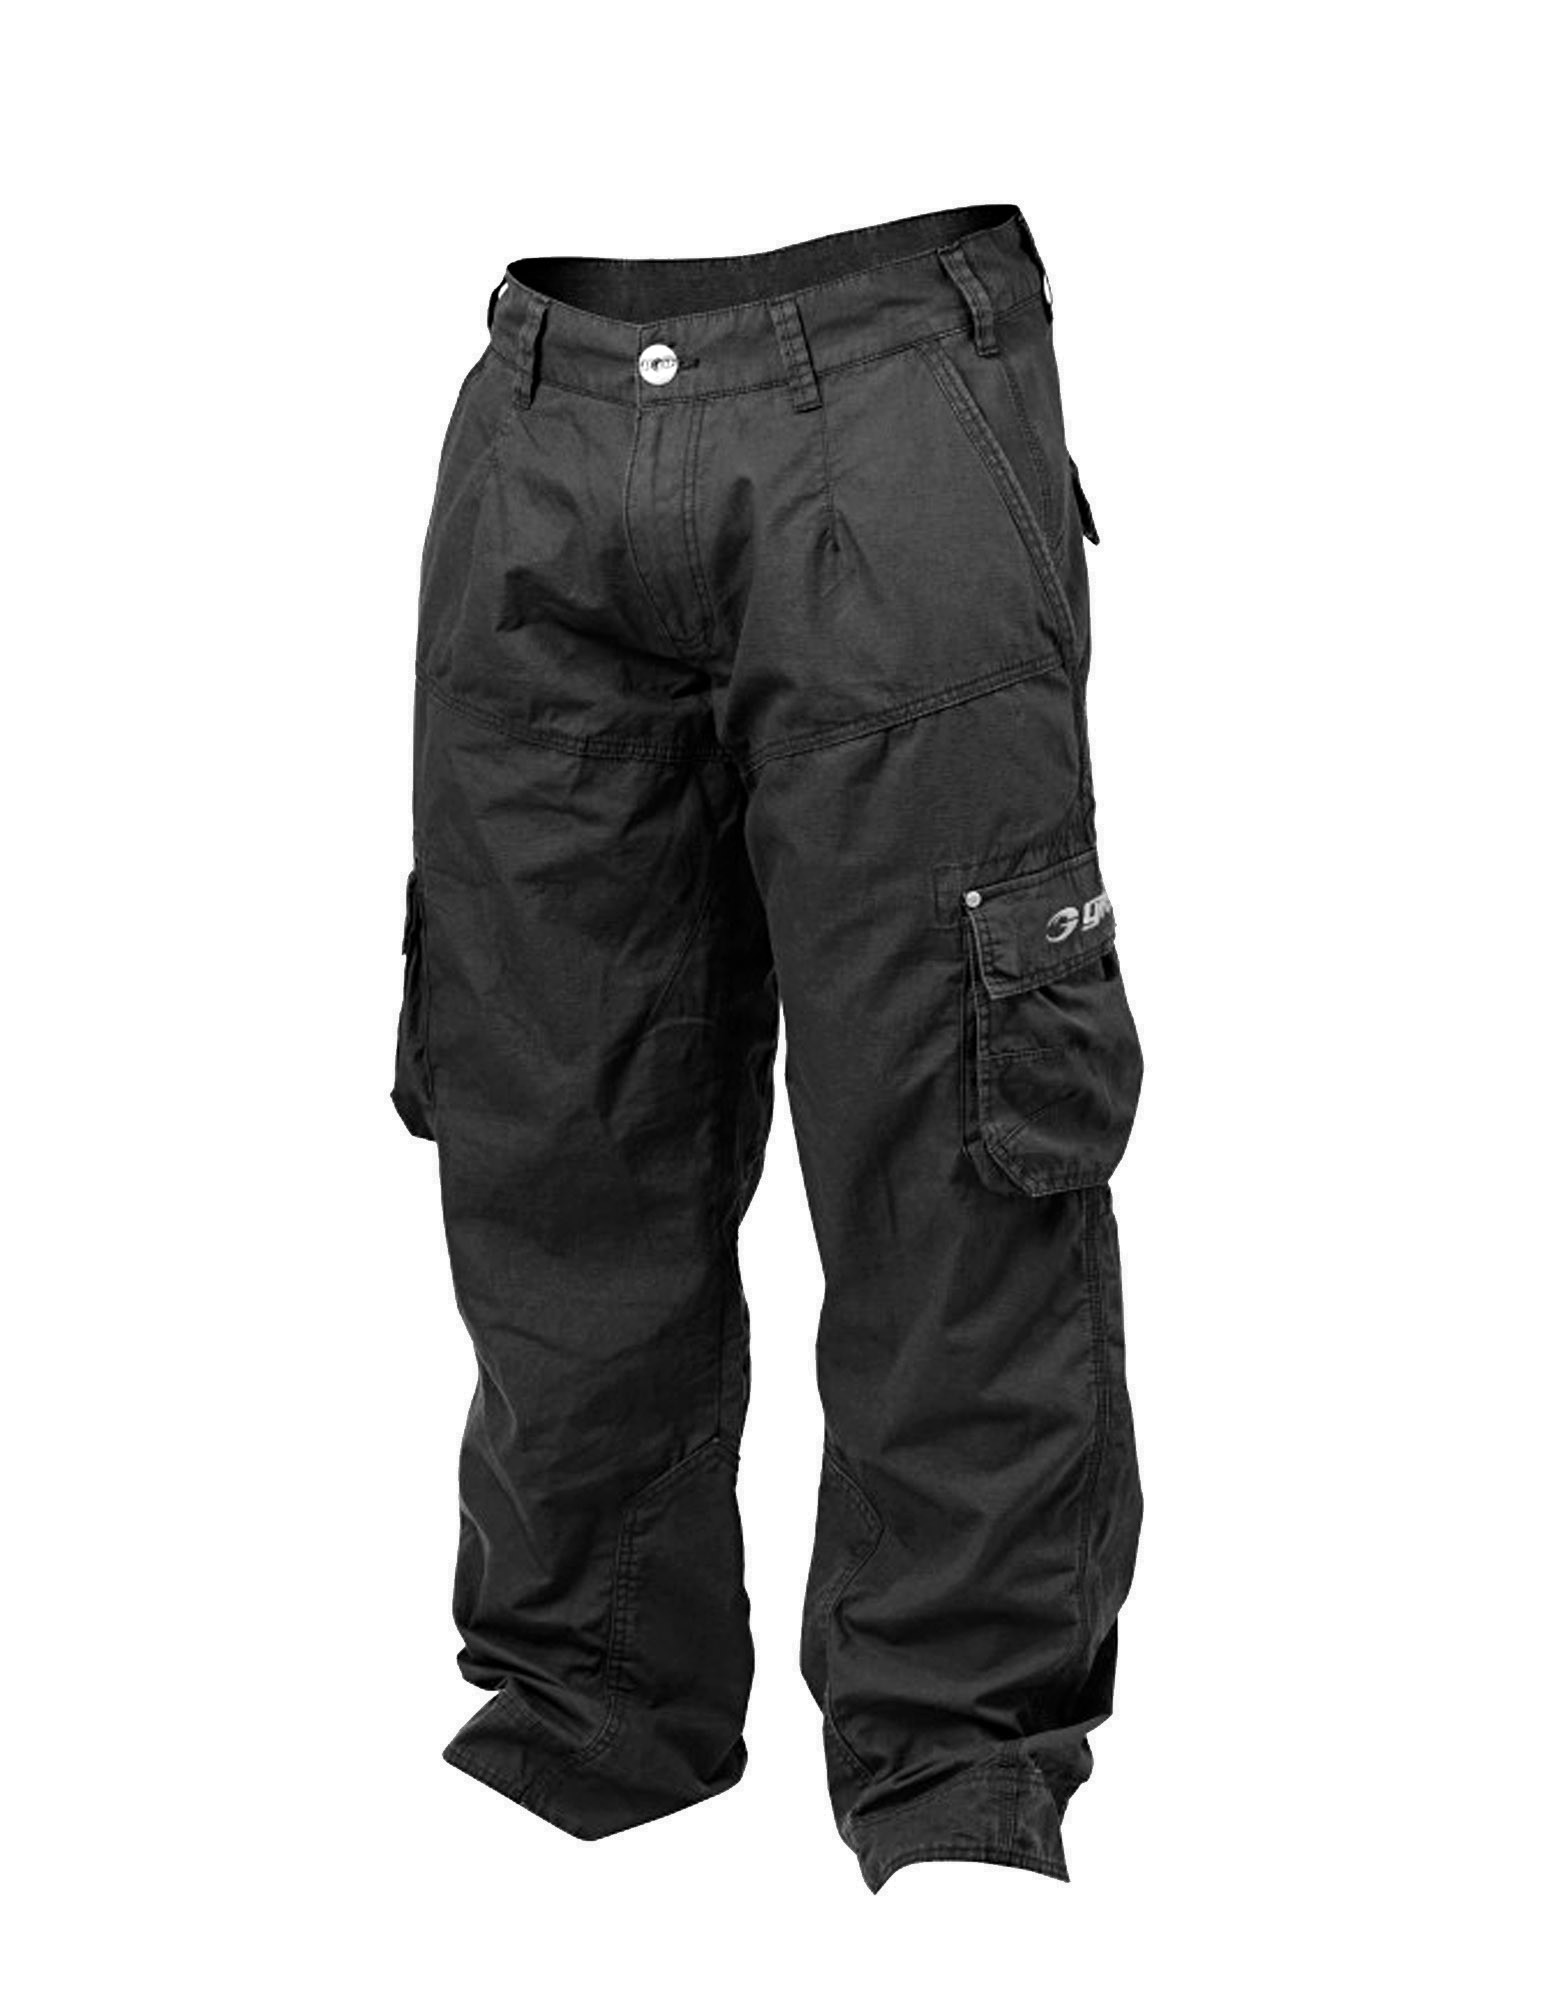 Gasp Street Pant by GASP WEAR (color: wash black)